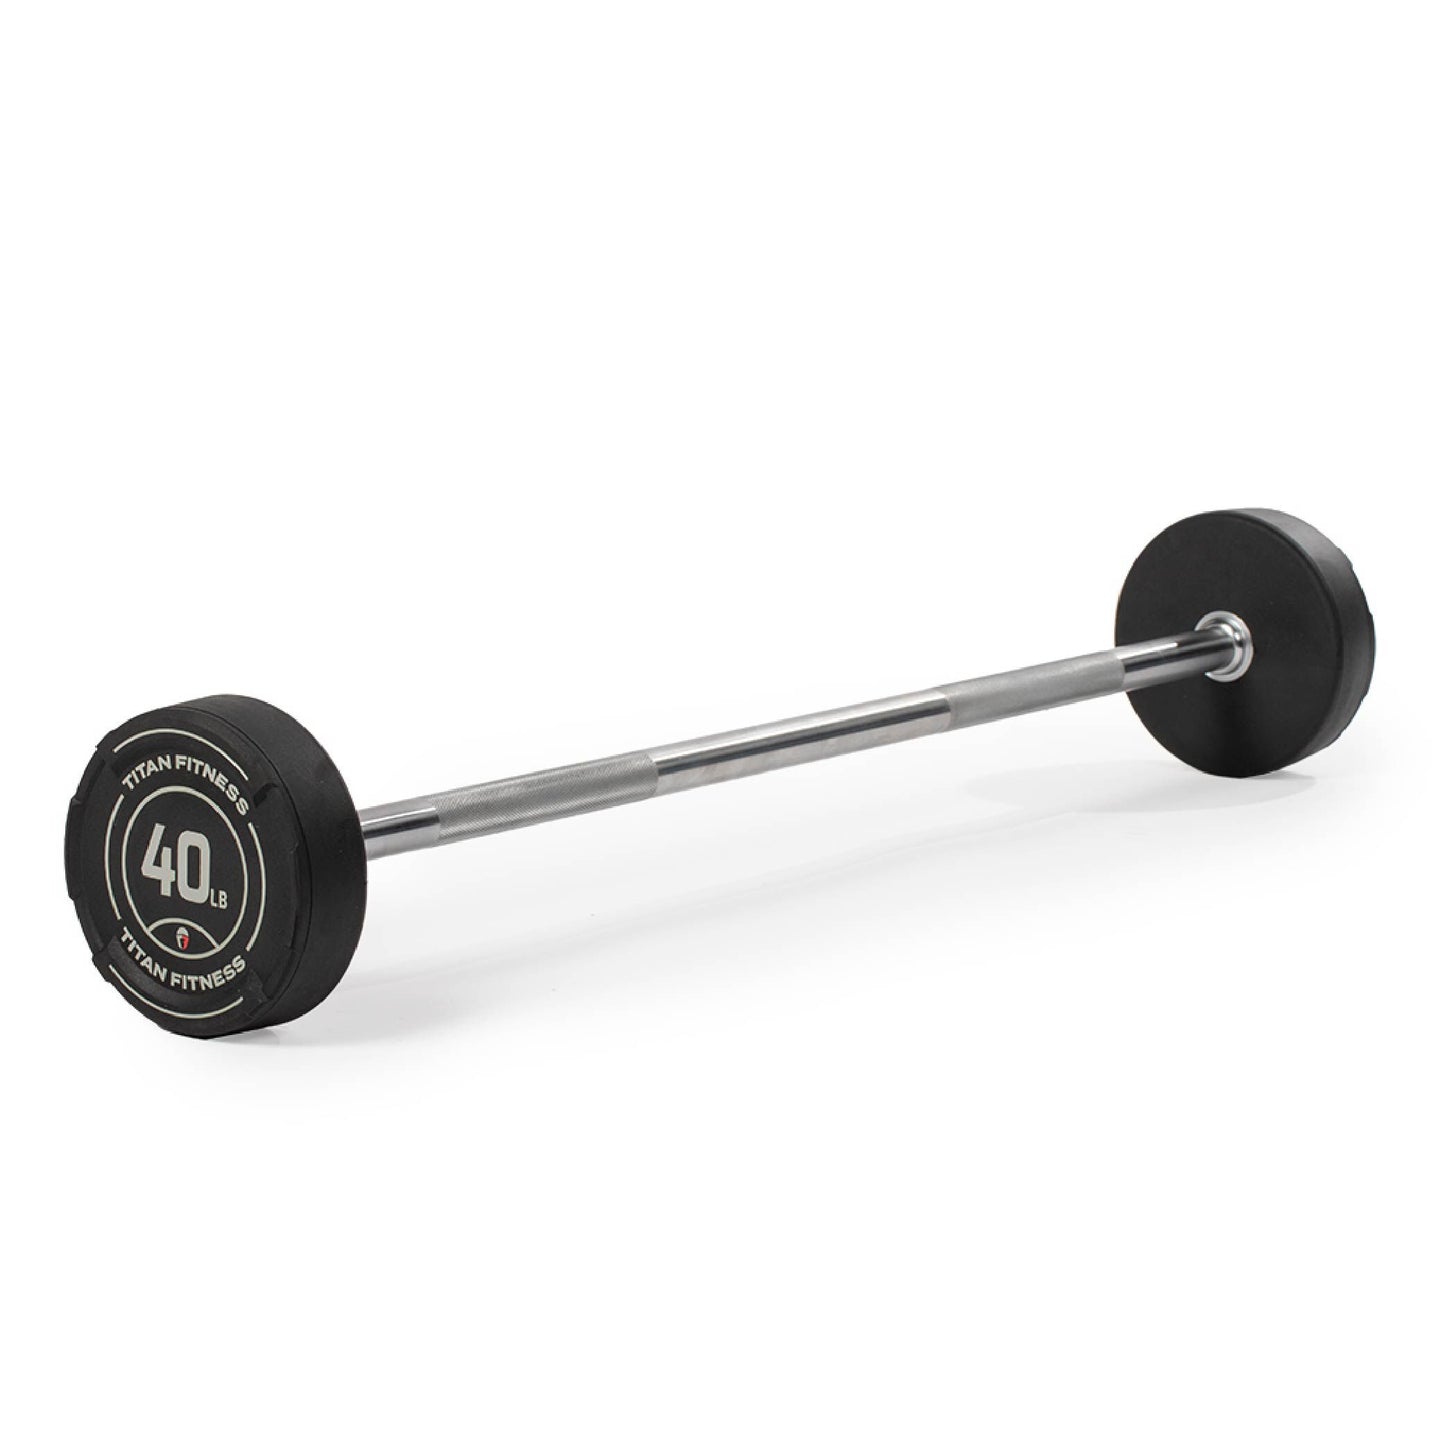 40 LB Straight Fixed Rubber Barbell - view 1